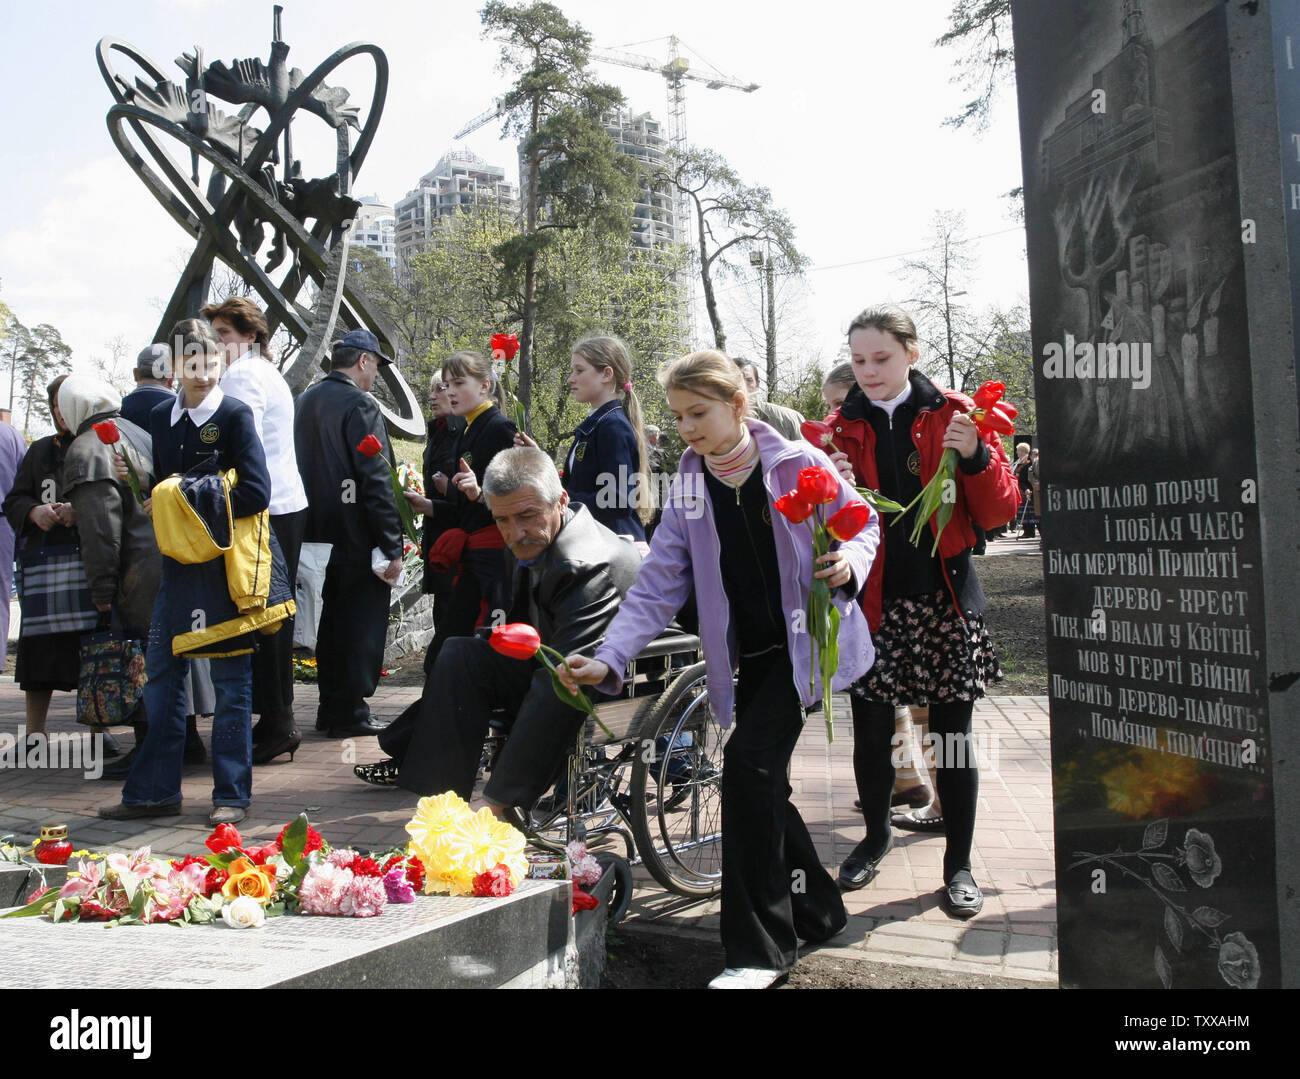 People place flowers at the memorial to Chernobyl victims in Kiev on April 26, 2007. Ukraine marks the 21st anniversary of the world's worst civil nuclear tragedy when Chernobyl's reactor No.4 exploded sending radioactive clouds in the air, poisoning vast areas in Ukraine, Belarus and Russia, and contaminating much of Europe. (UPI Photo/Sergey Starostenko) Stock Photo